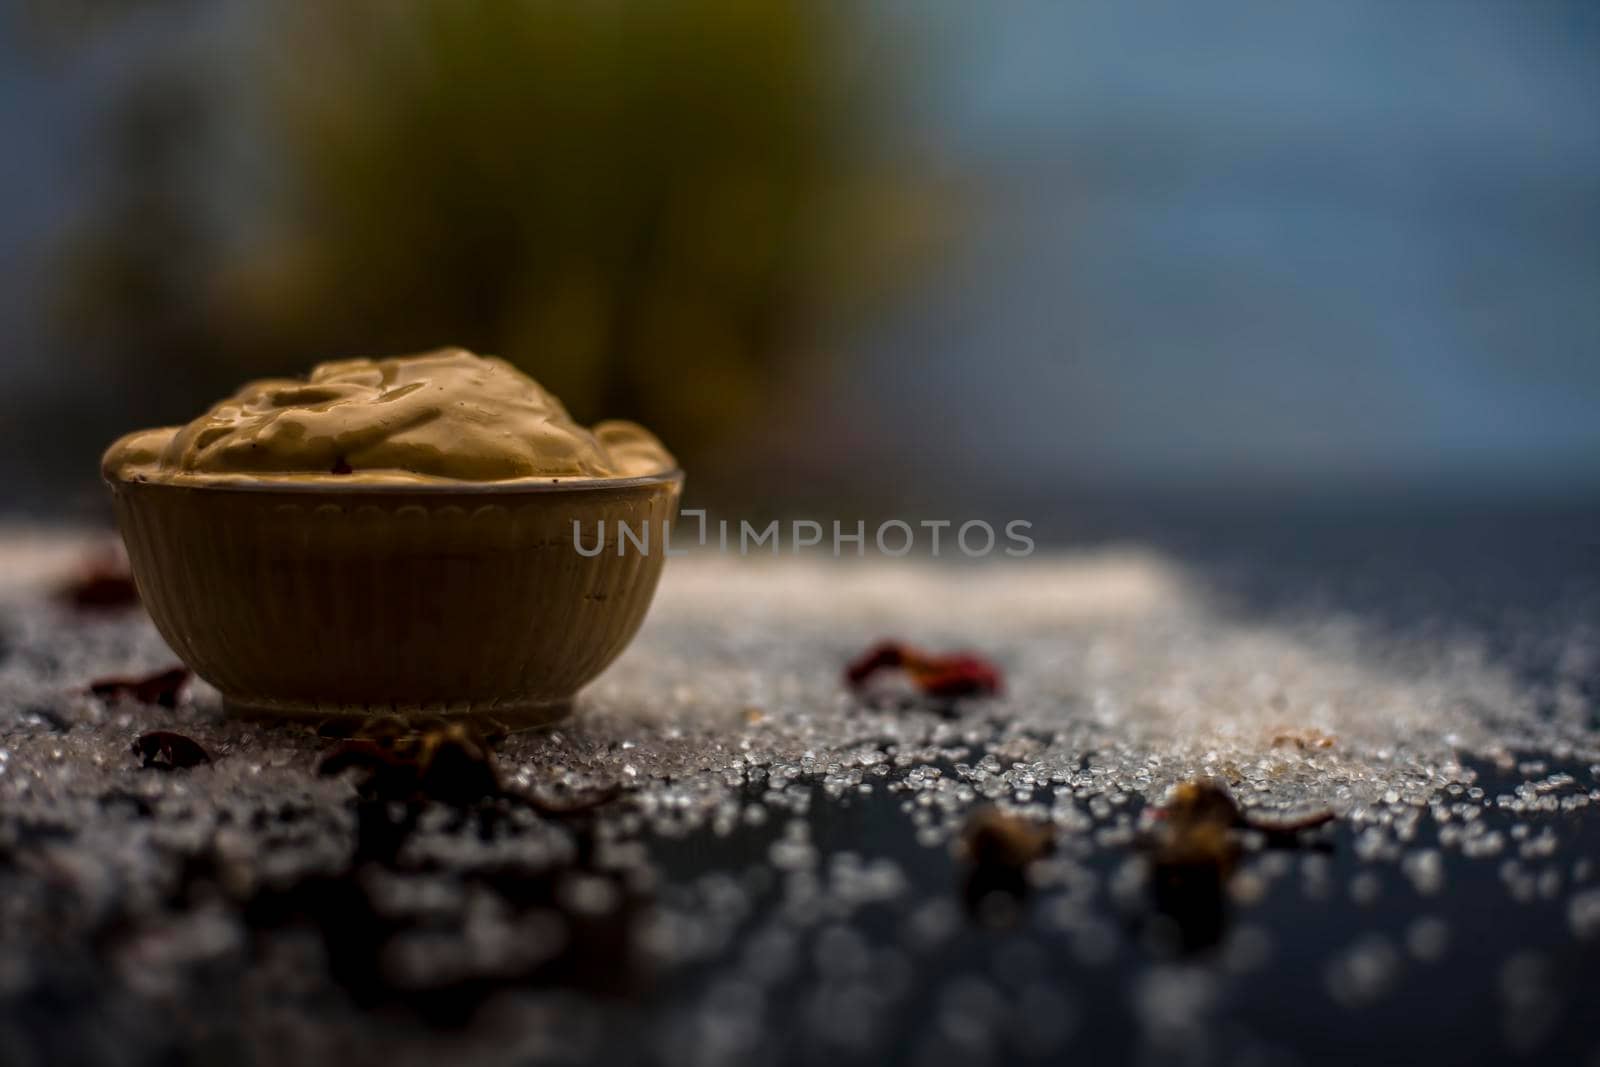 Ubtan/face mask/face pack of Multani mitti or fuller's earth on wooden surface in a glass bowl consisting of Multani mitti and coconut oil for the remedy or treatment of suntan.On the wooden surface. by mirzamlk